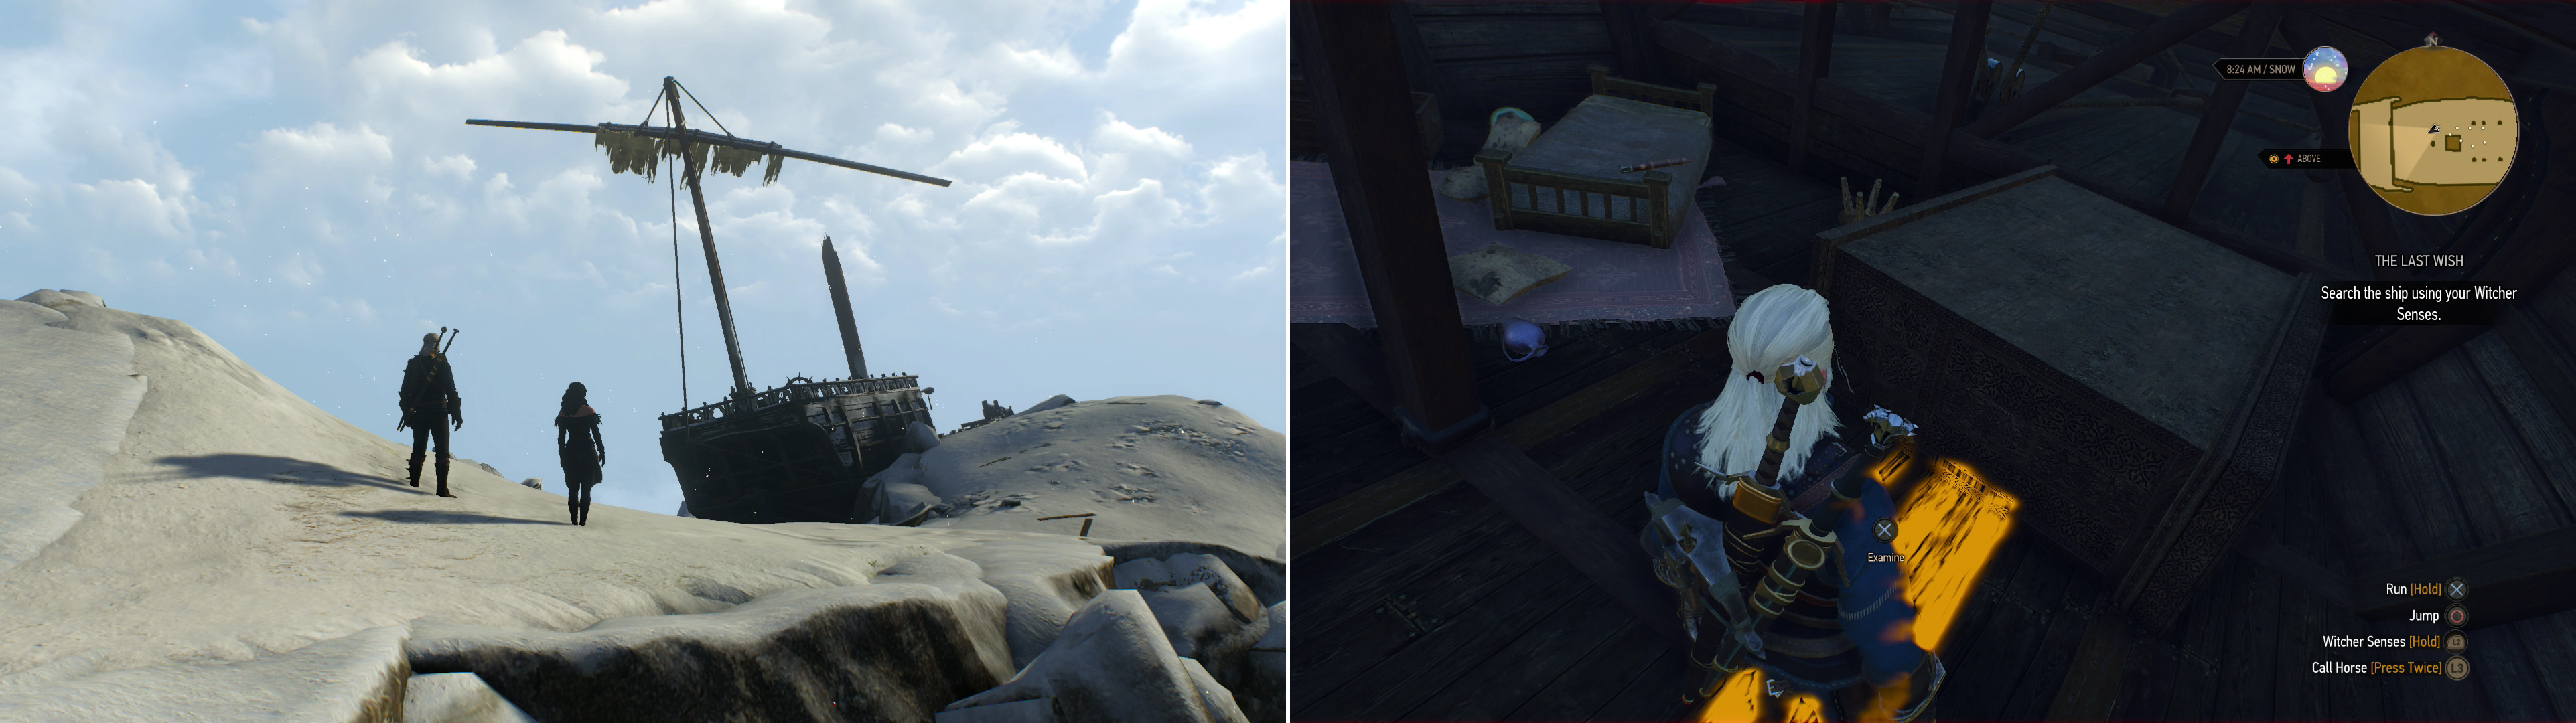 Find the other half of the mage’s ship in a most unusual location (left), then search the ship to discover the mage’s unfortunate fate (right).